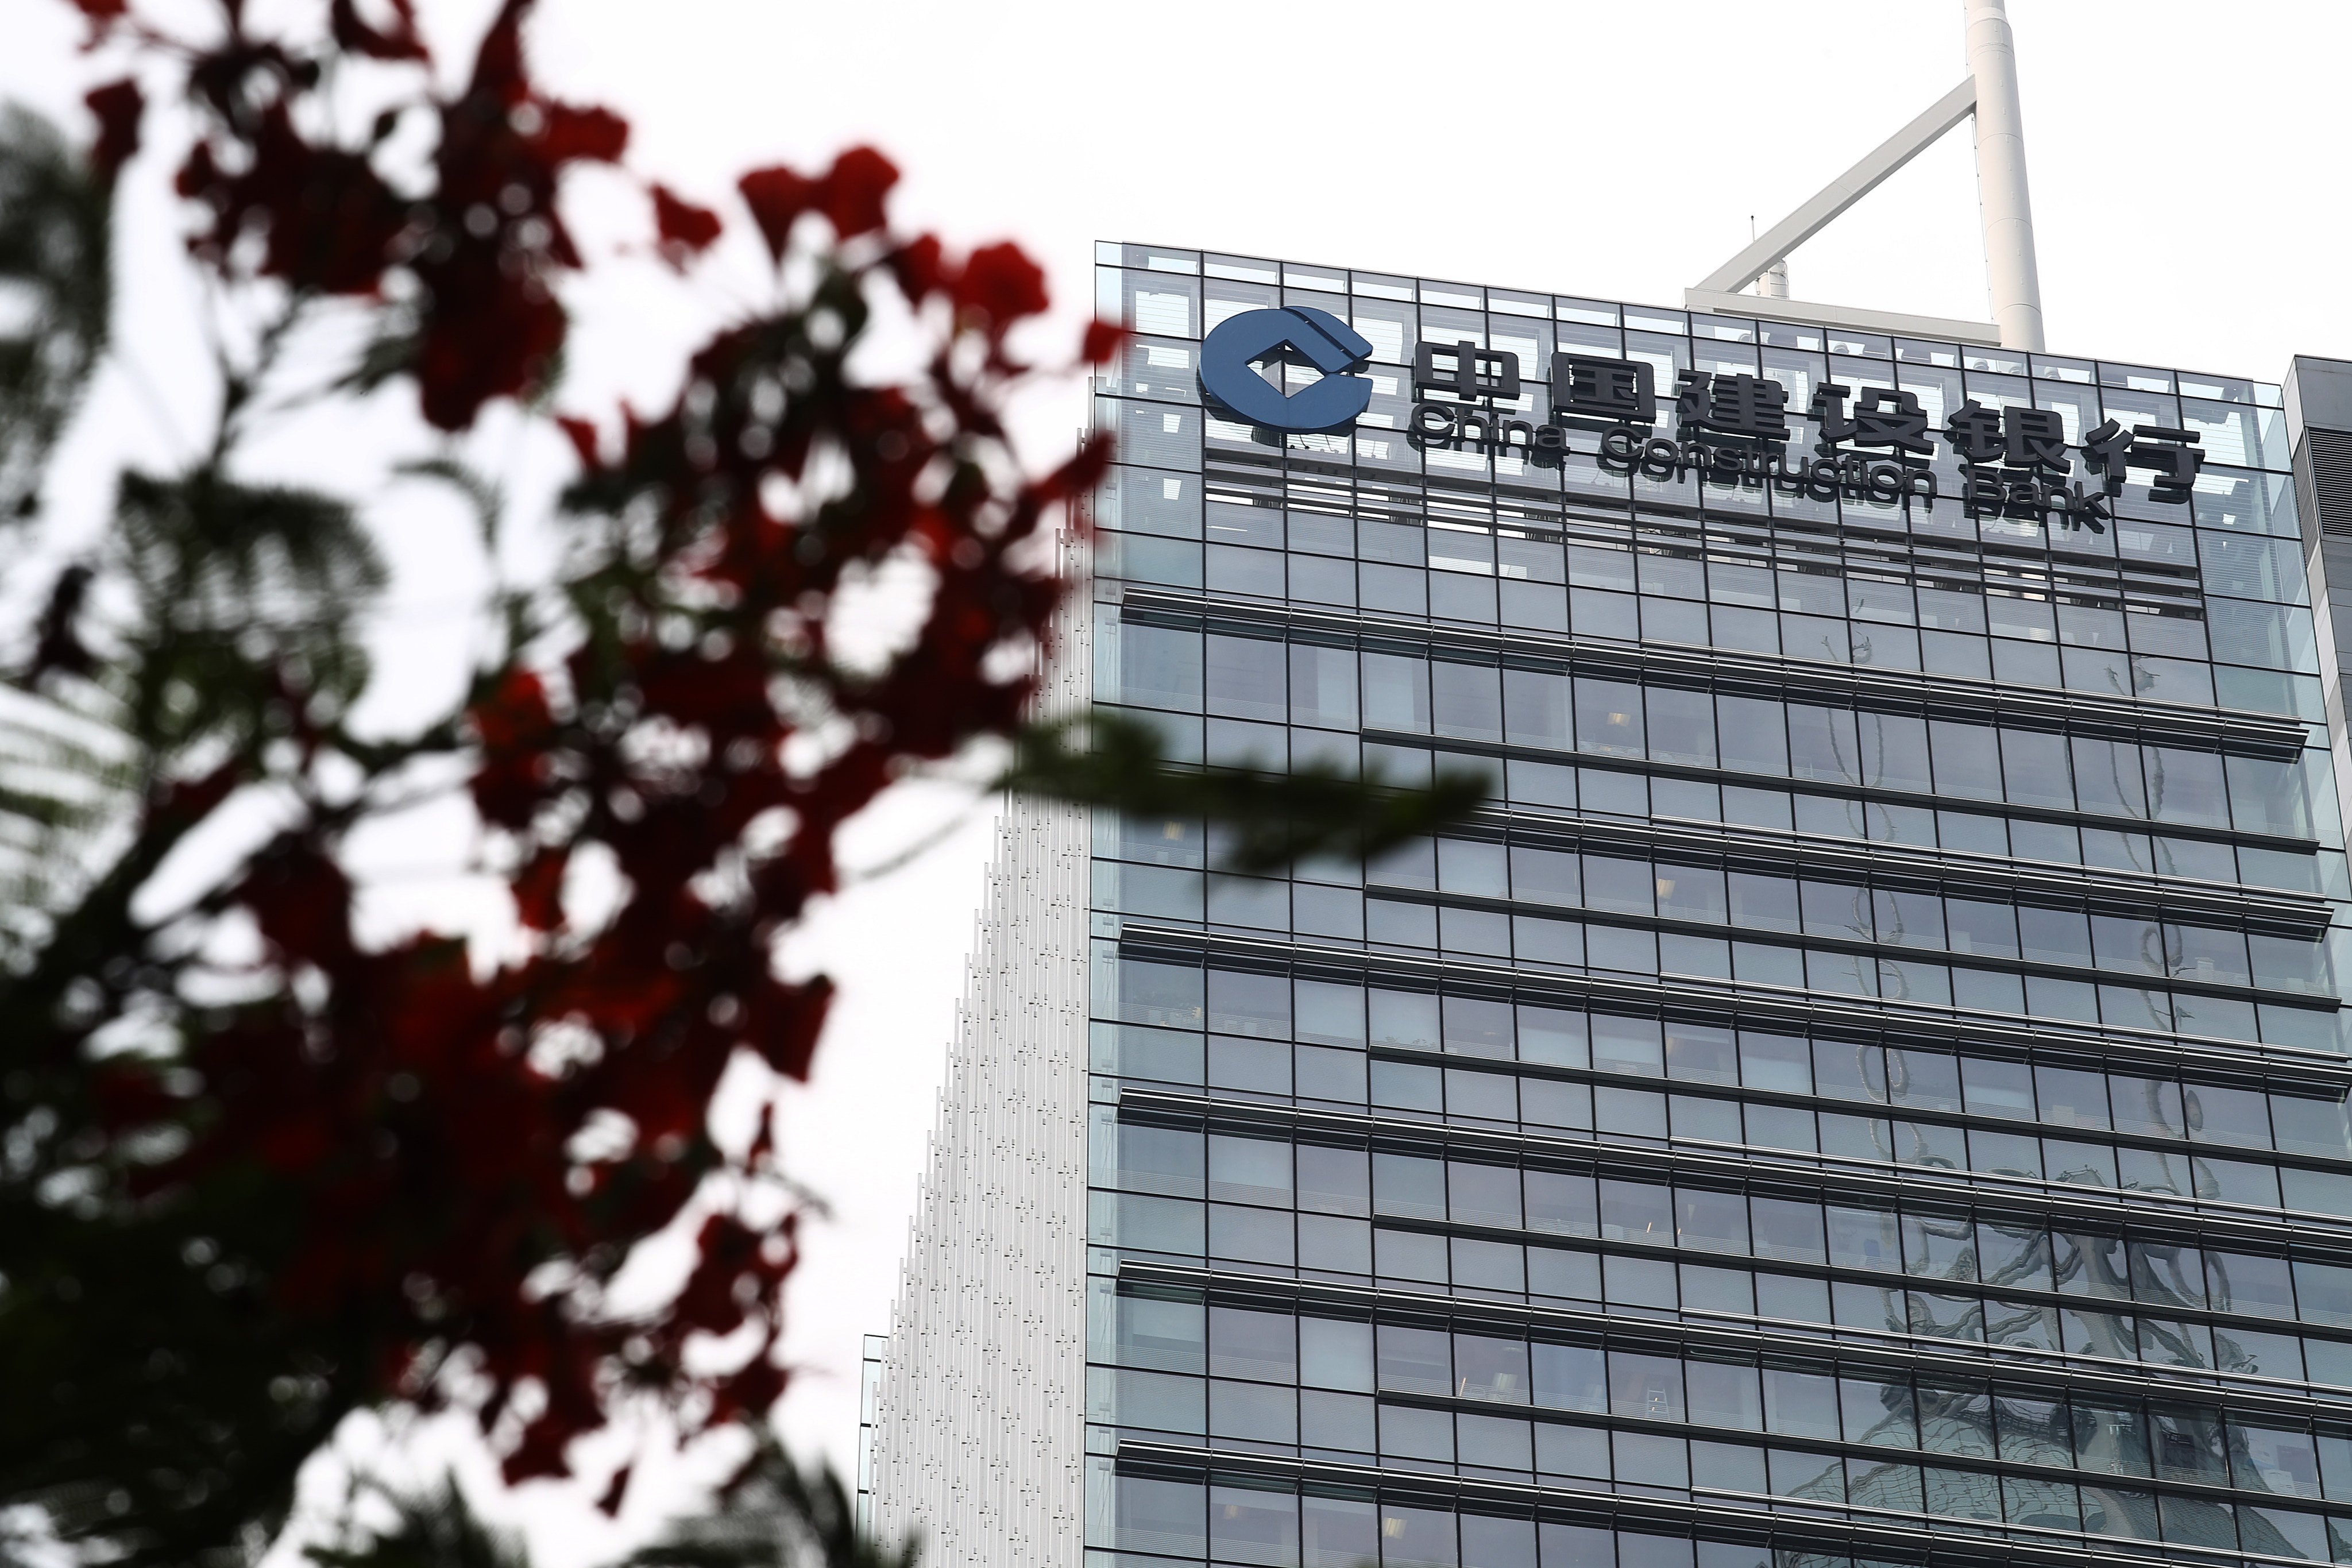 A top executive at China Construction Bank in Hong Kong has been sued for sexual harassment by a woman former employee. Photo: Nora Tam